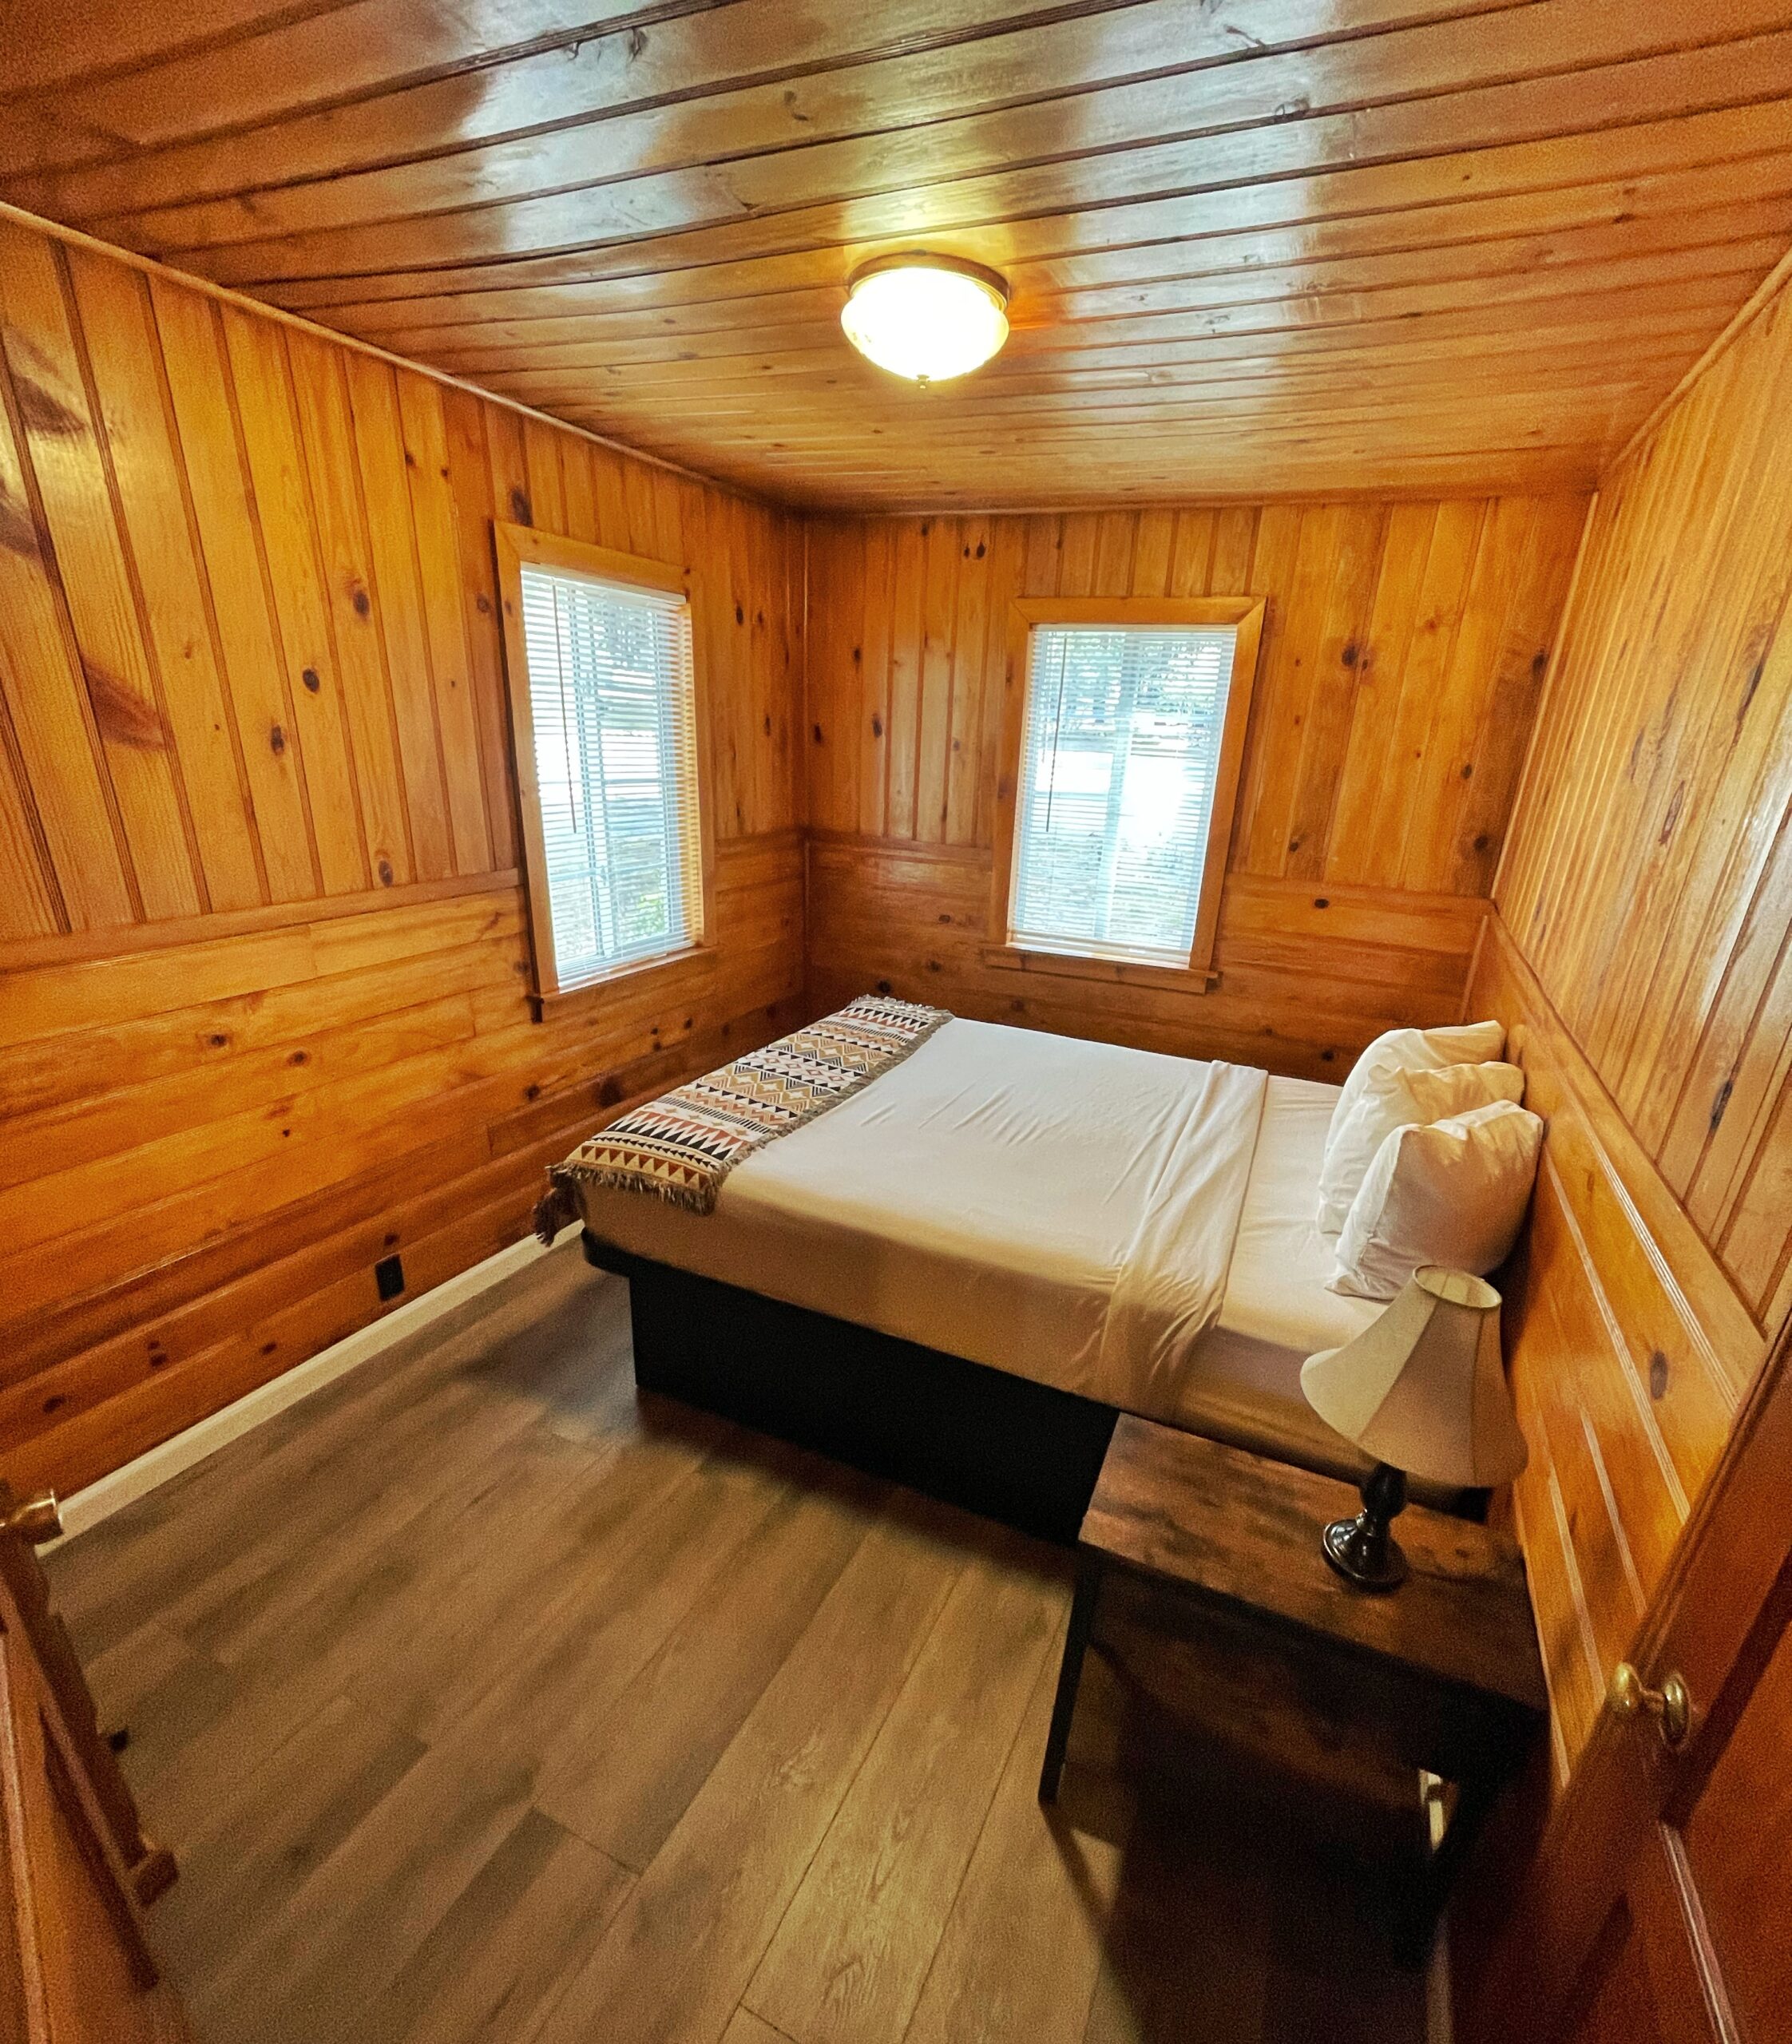 Cabin 19 at Sessions Retreat: Rustic comfort, perfect for a nature escape.